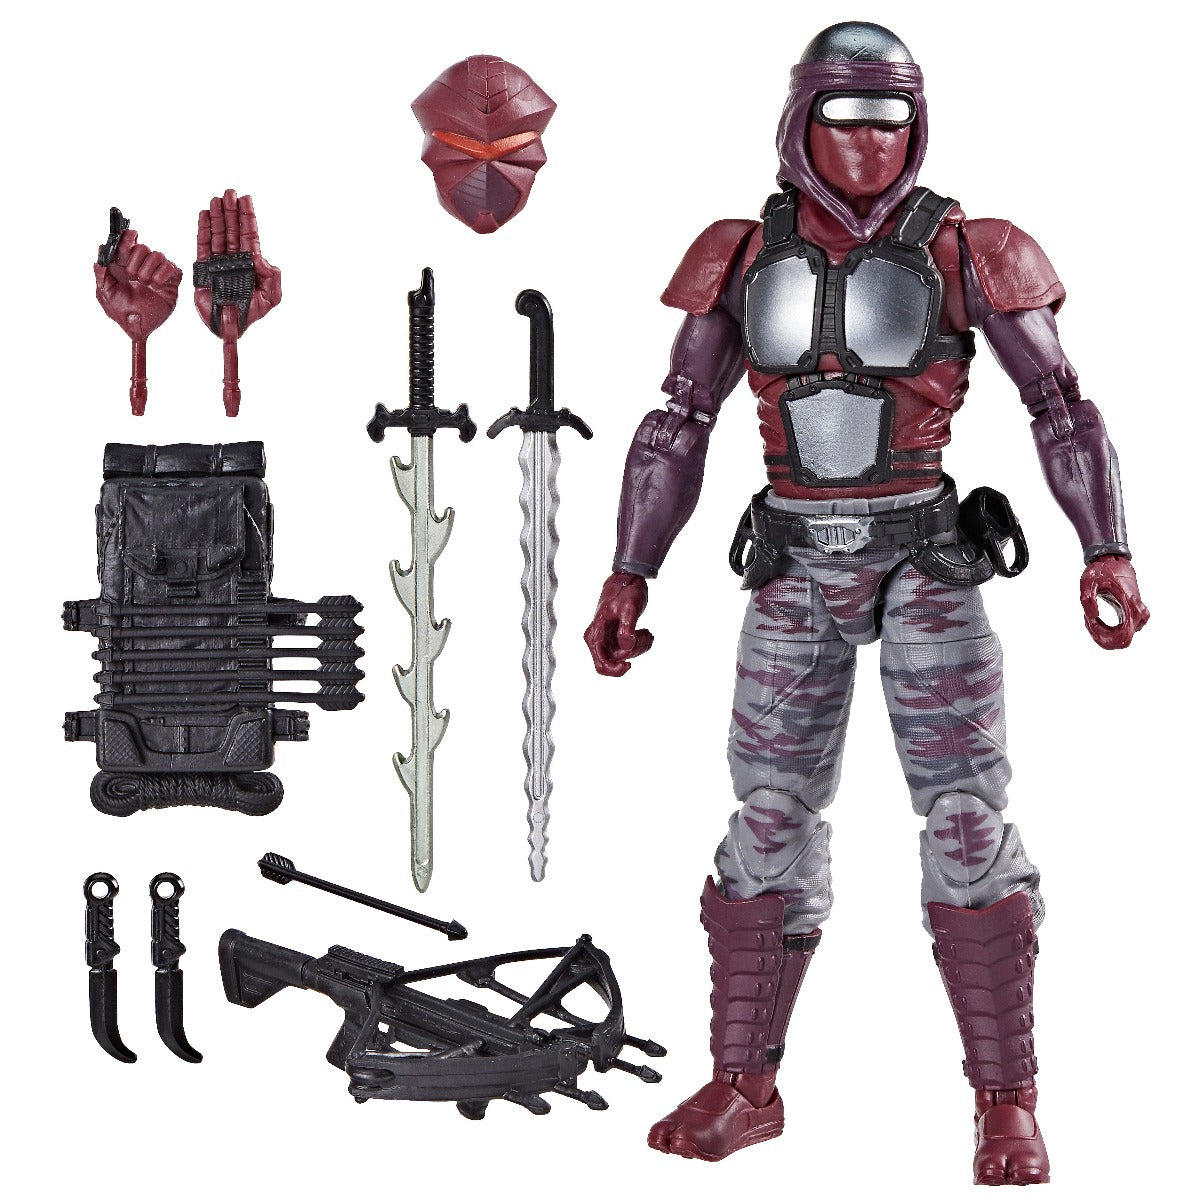 G.I. Joe Classified Series #121, Night-Creeper, Collectible 6 Inch Ninja Action Figure with 10 Accessories